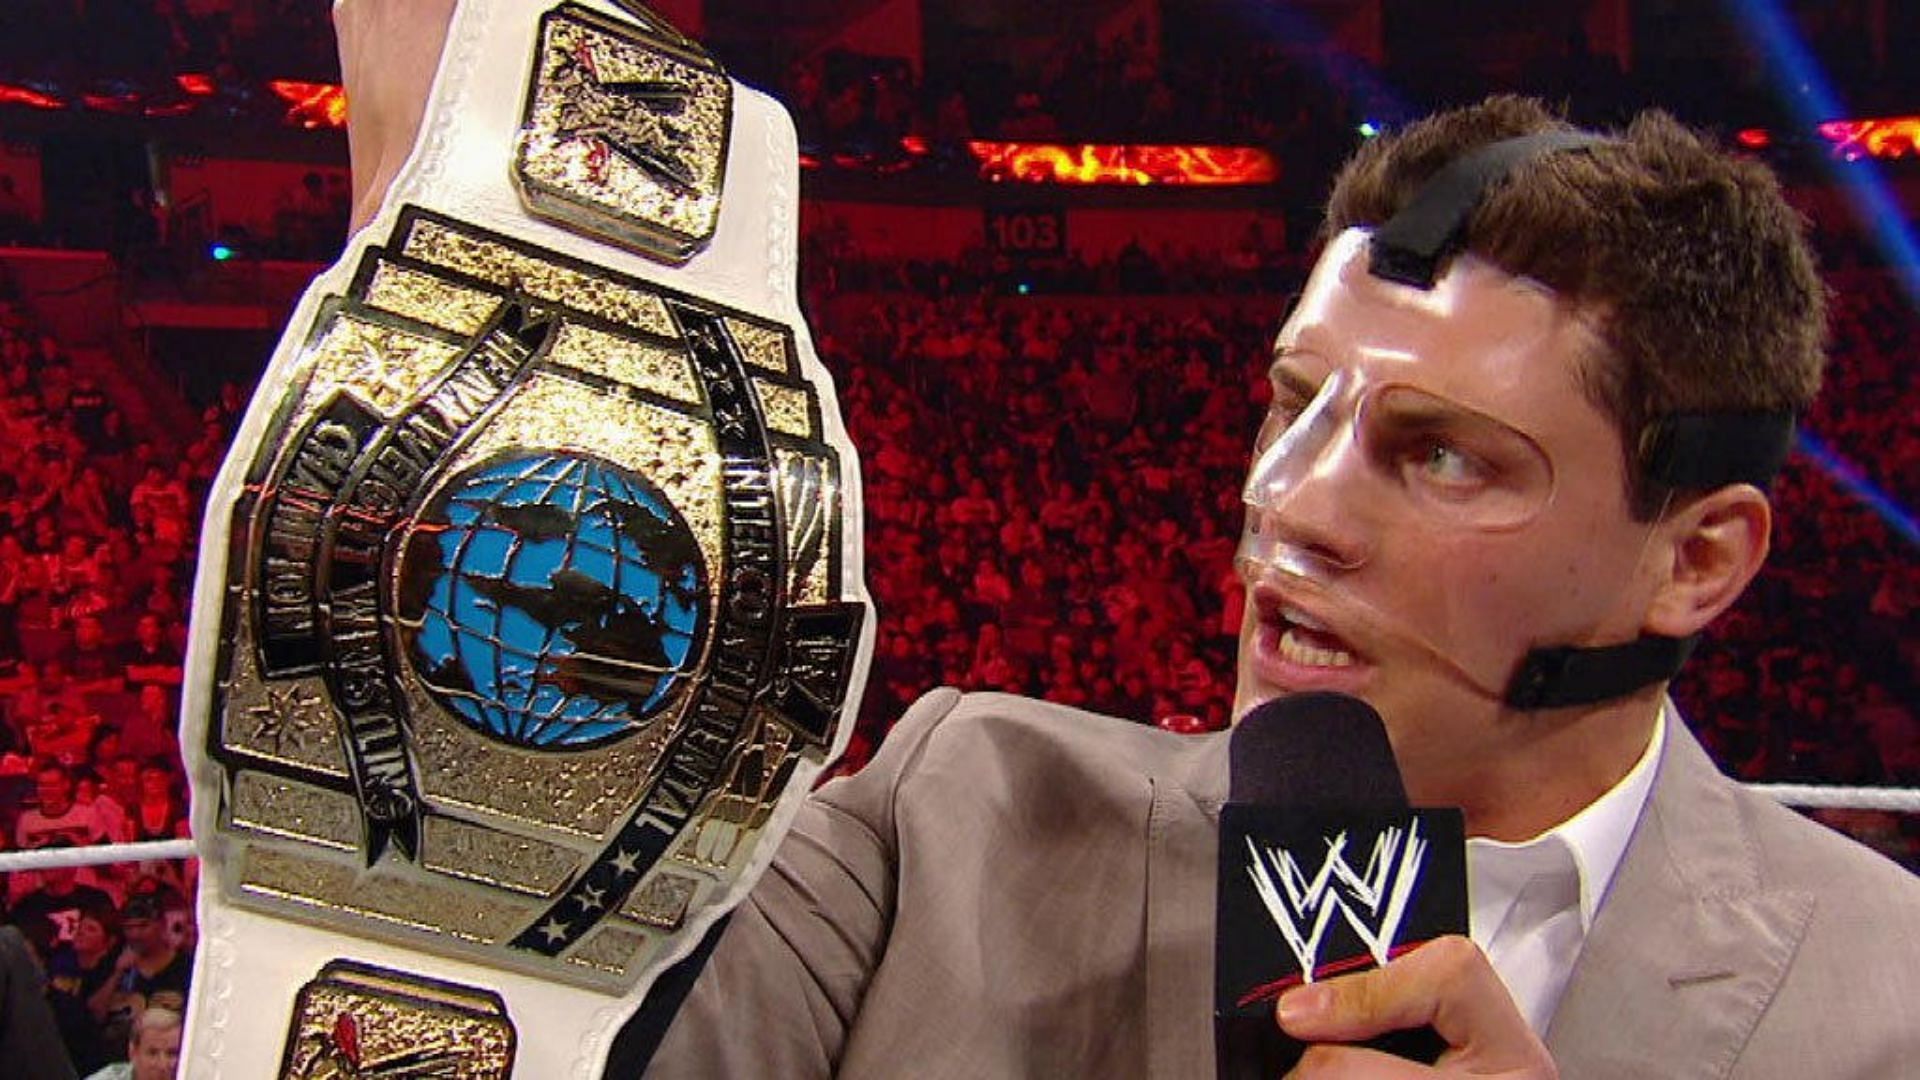 Cody Rhodes brought prestige back to the Intercontinental Championship in 2011